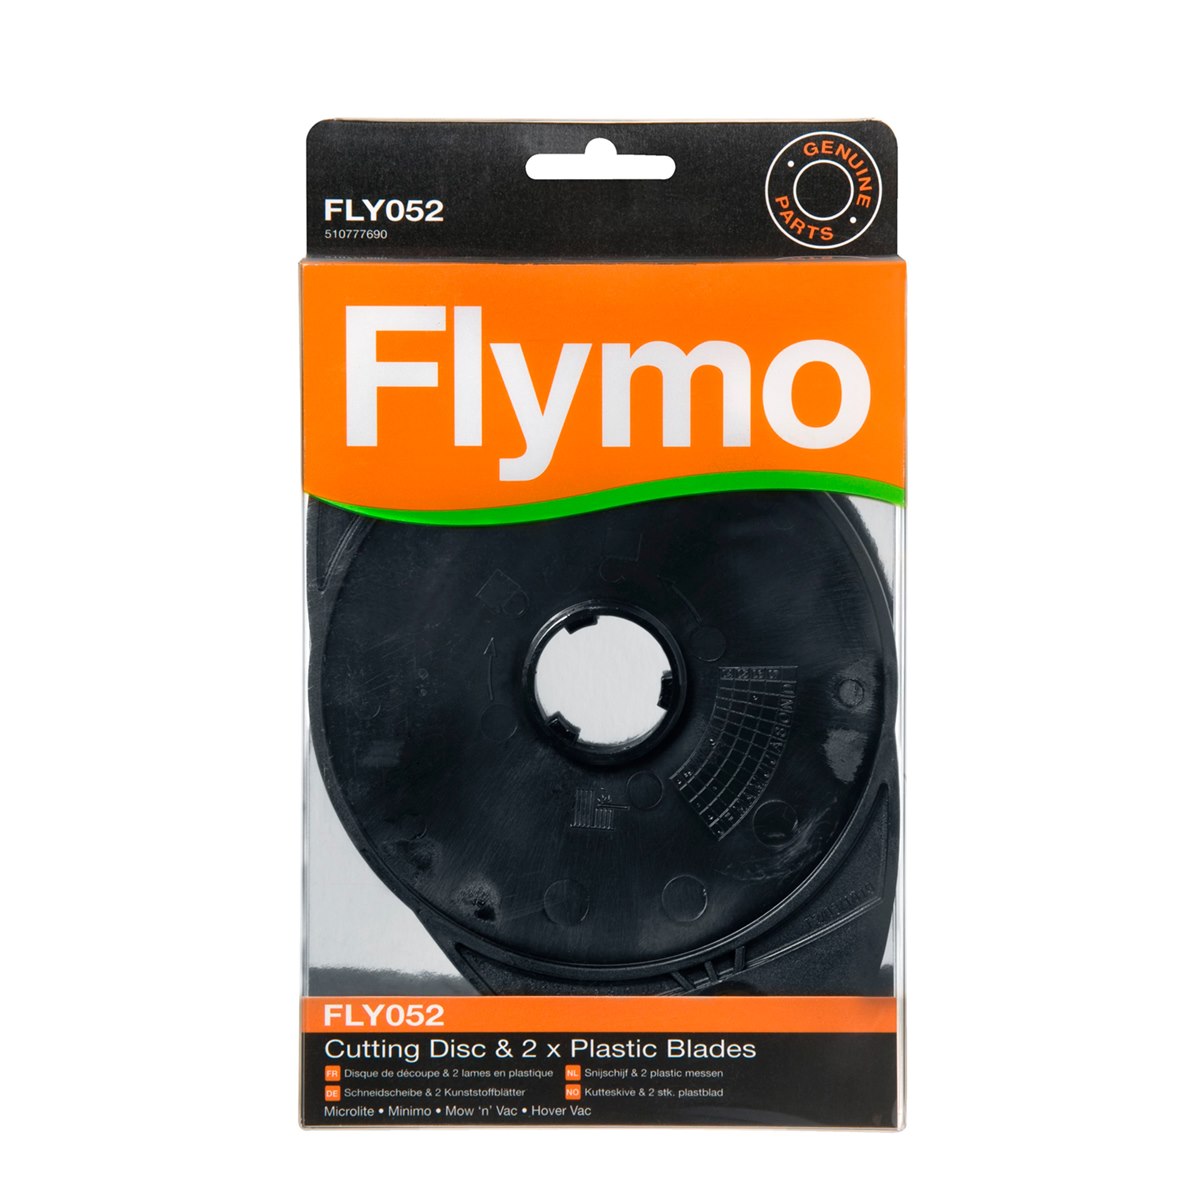 FLY052 Genuine Flymo Cutting Disc and Blades